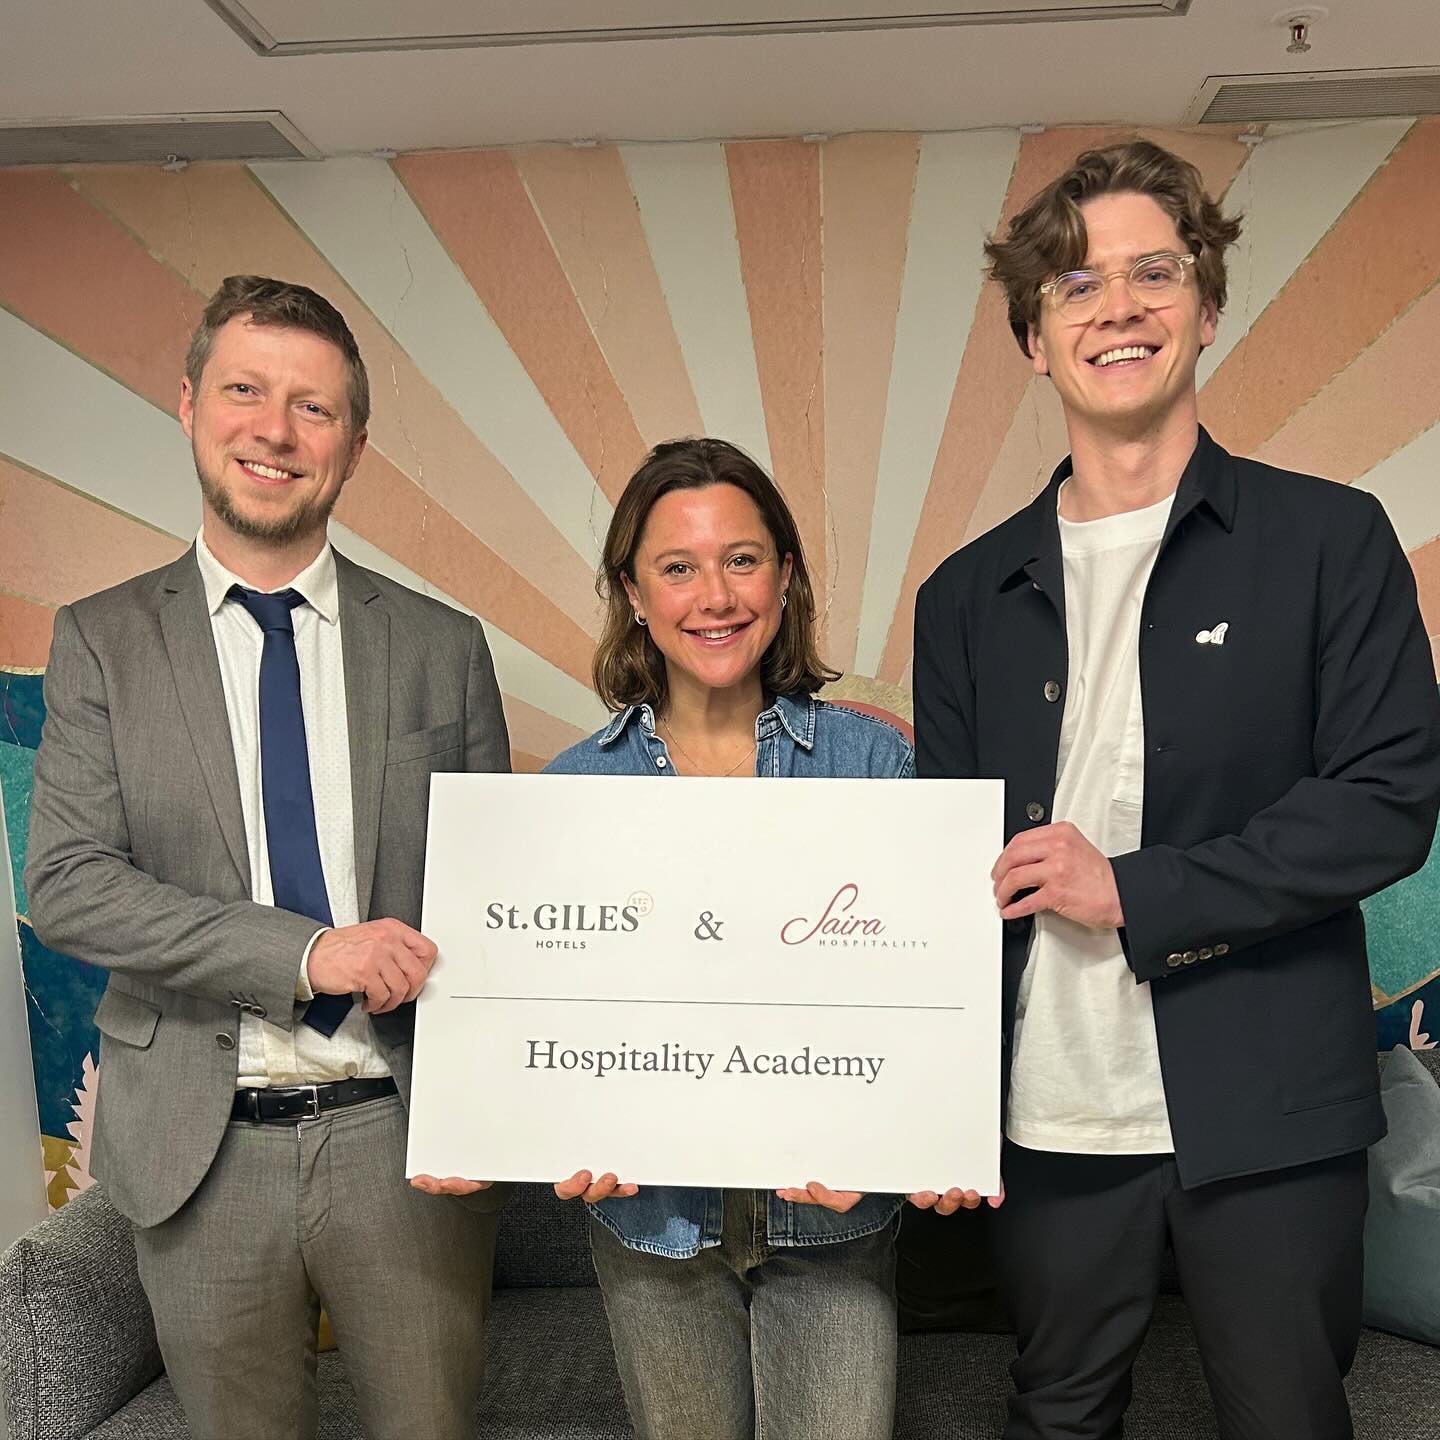 Graduation day at @sairahospitality X @stgiles_london Academy! 🎓
 
Last Friday Nadia Walford PR was delighted to support graduates of the groundbreaking partnership between Saira Hospitality &amp; The Hotels with Heart Foundation at St Giles Hotel, 